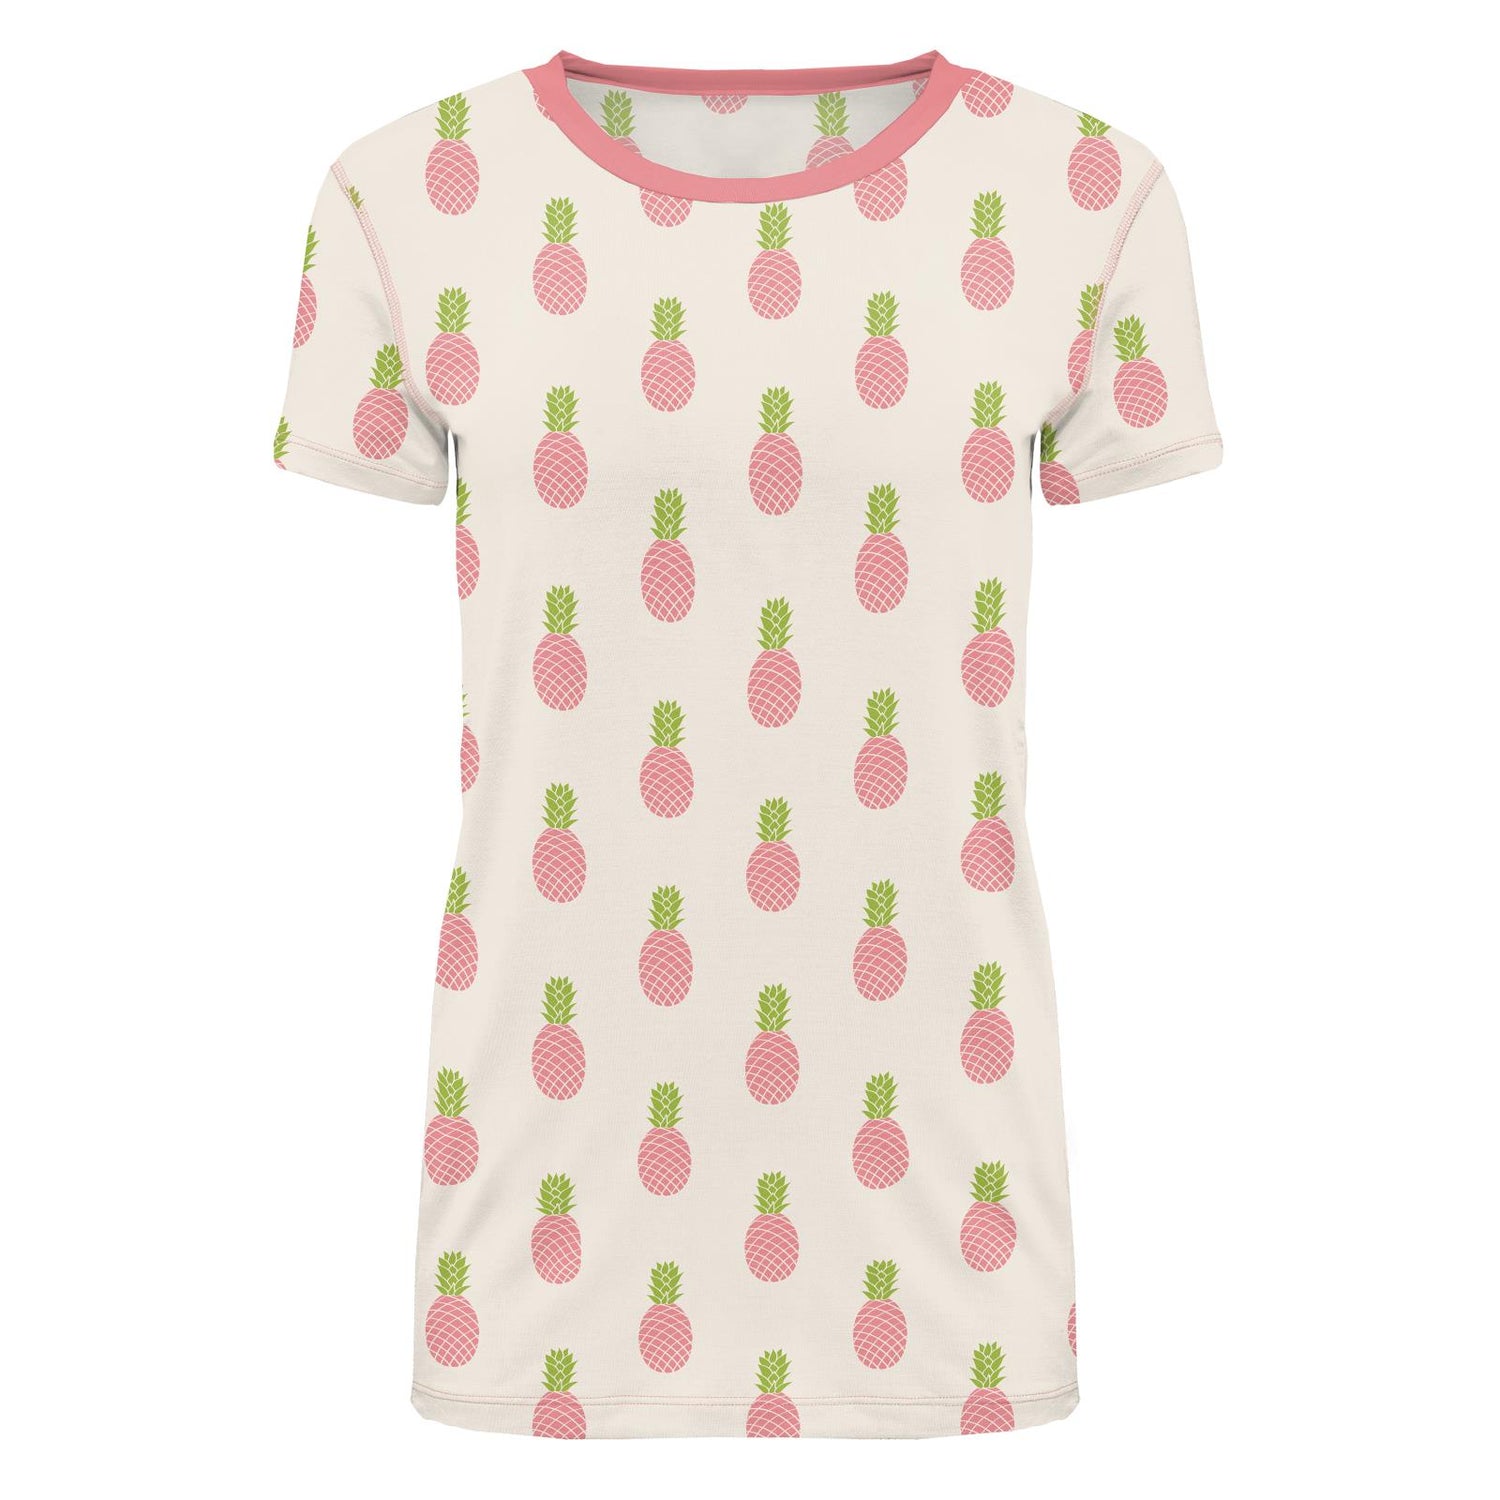 Women's Print Short Sleeve Relaxed Tee in Strawberry Pineapples